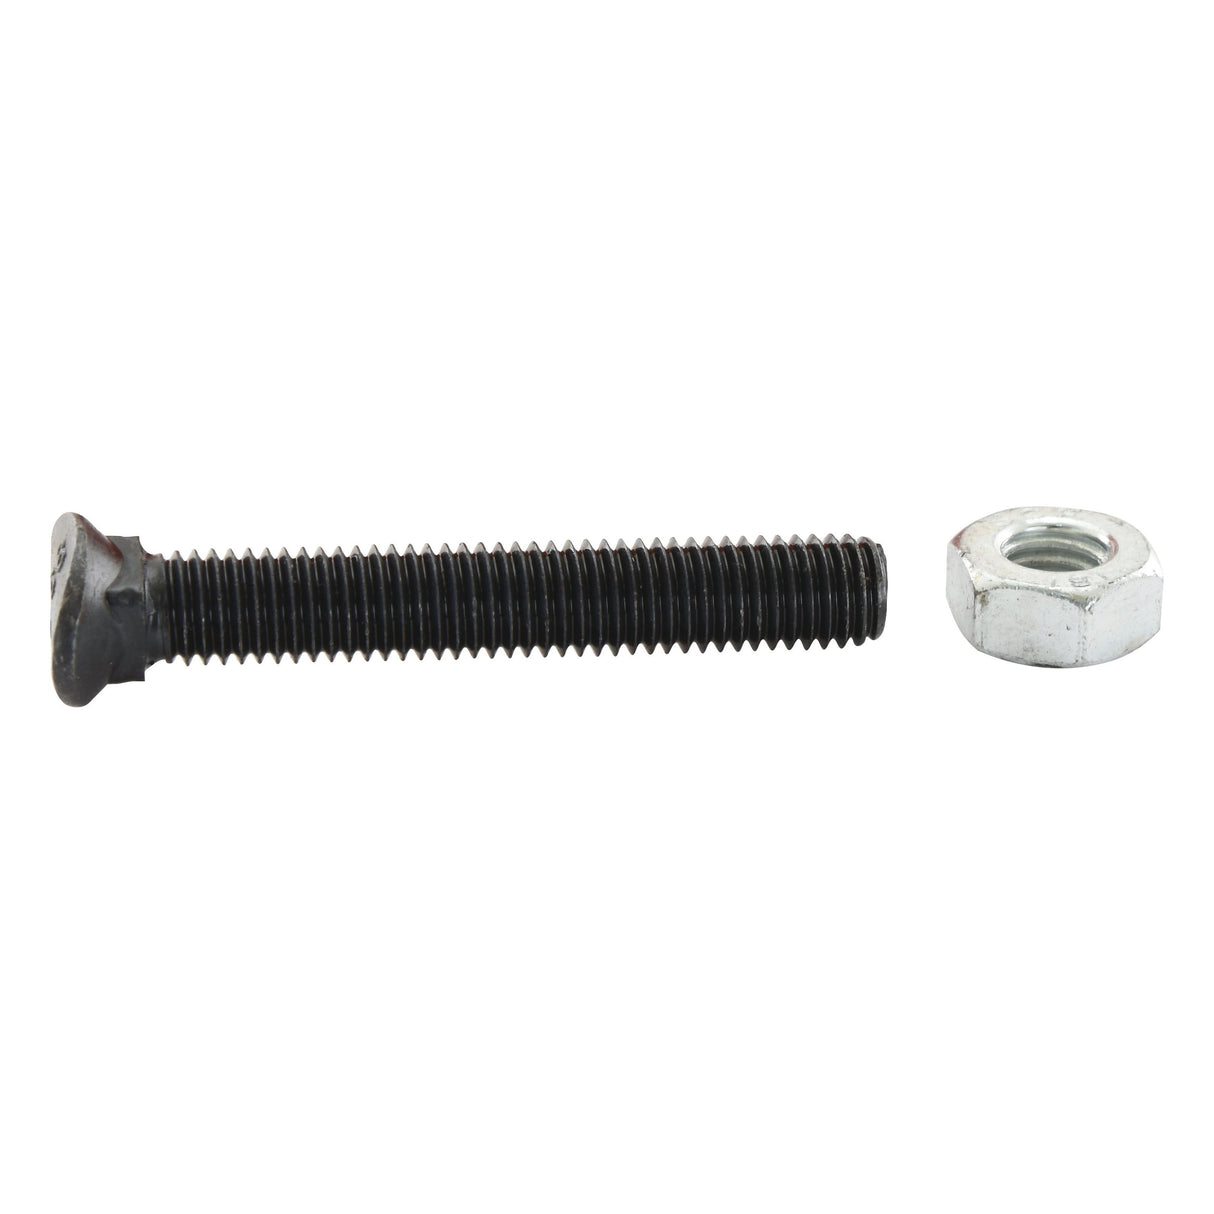 Oval Head Bolt Square Collar With Nut (TOCC) - M10 x 70mm, Tensile strength 8.8 (25 pcs. Box)
 - S.78772 - Farming Parts